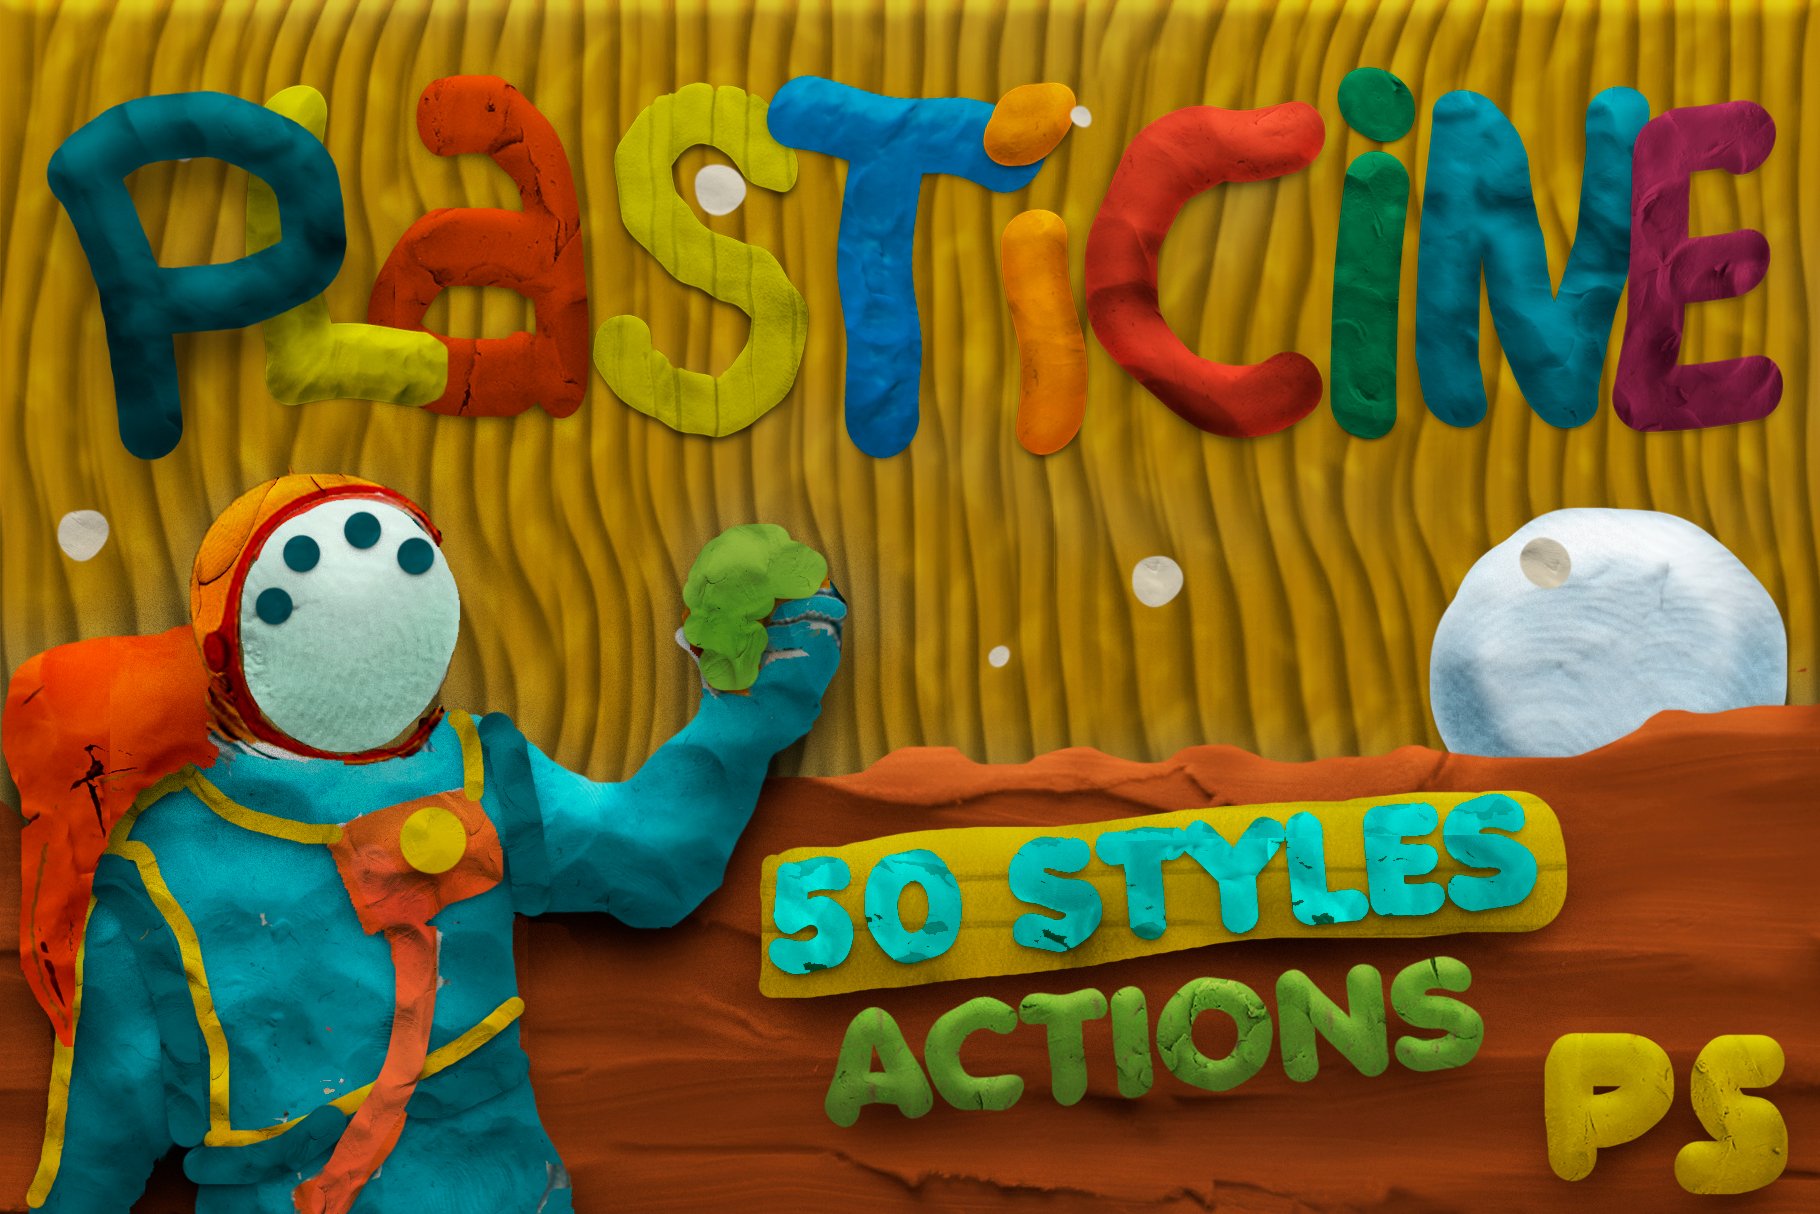 Plasticine Photoshop Toolkit Styles Actions - Design Cuts